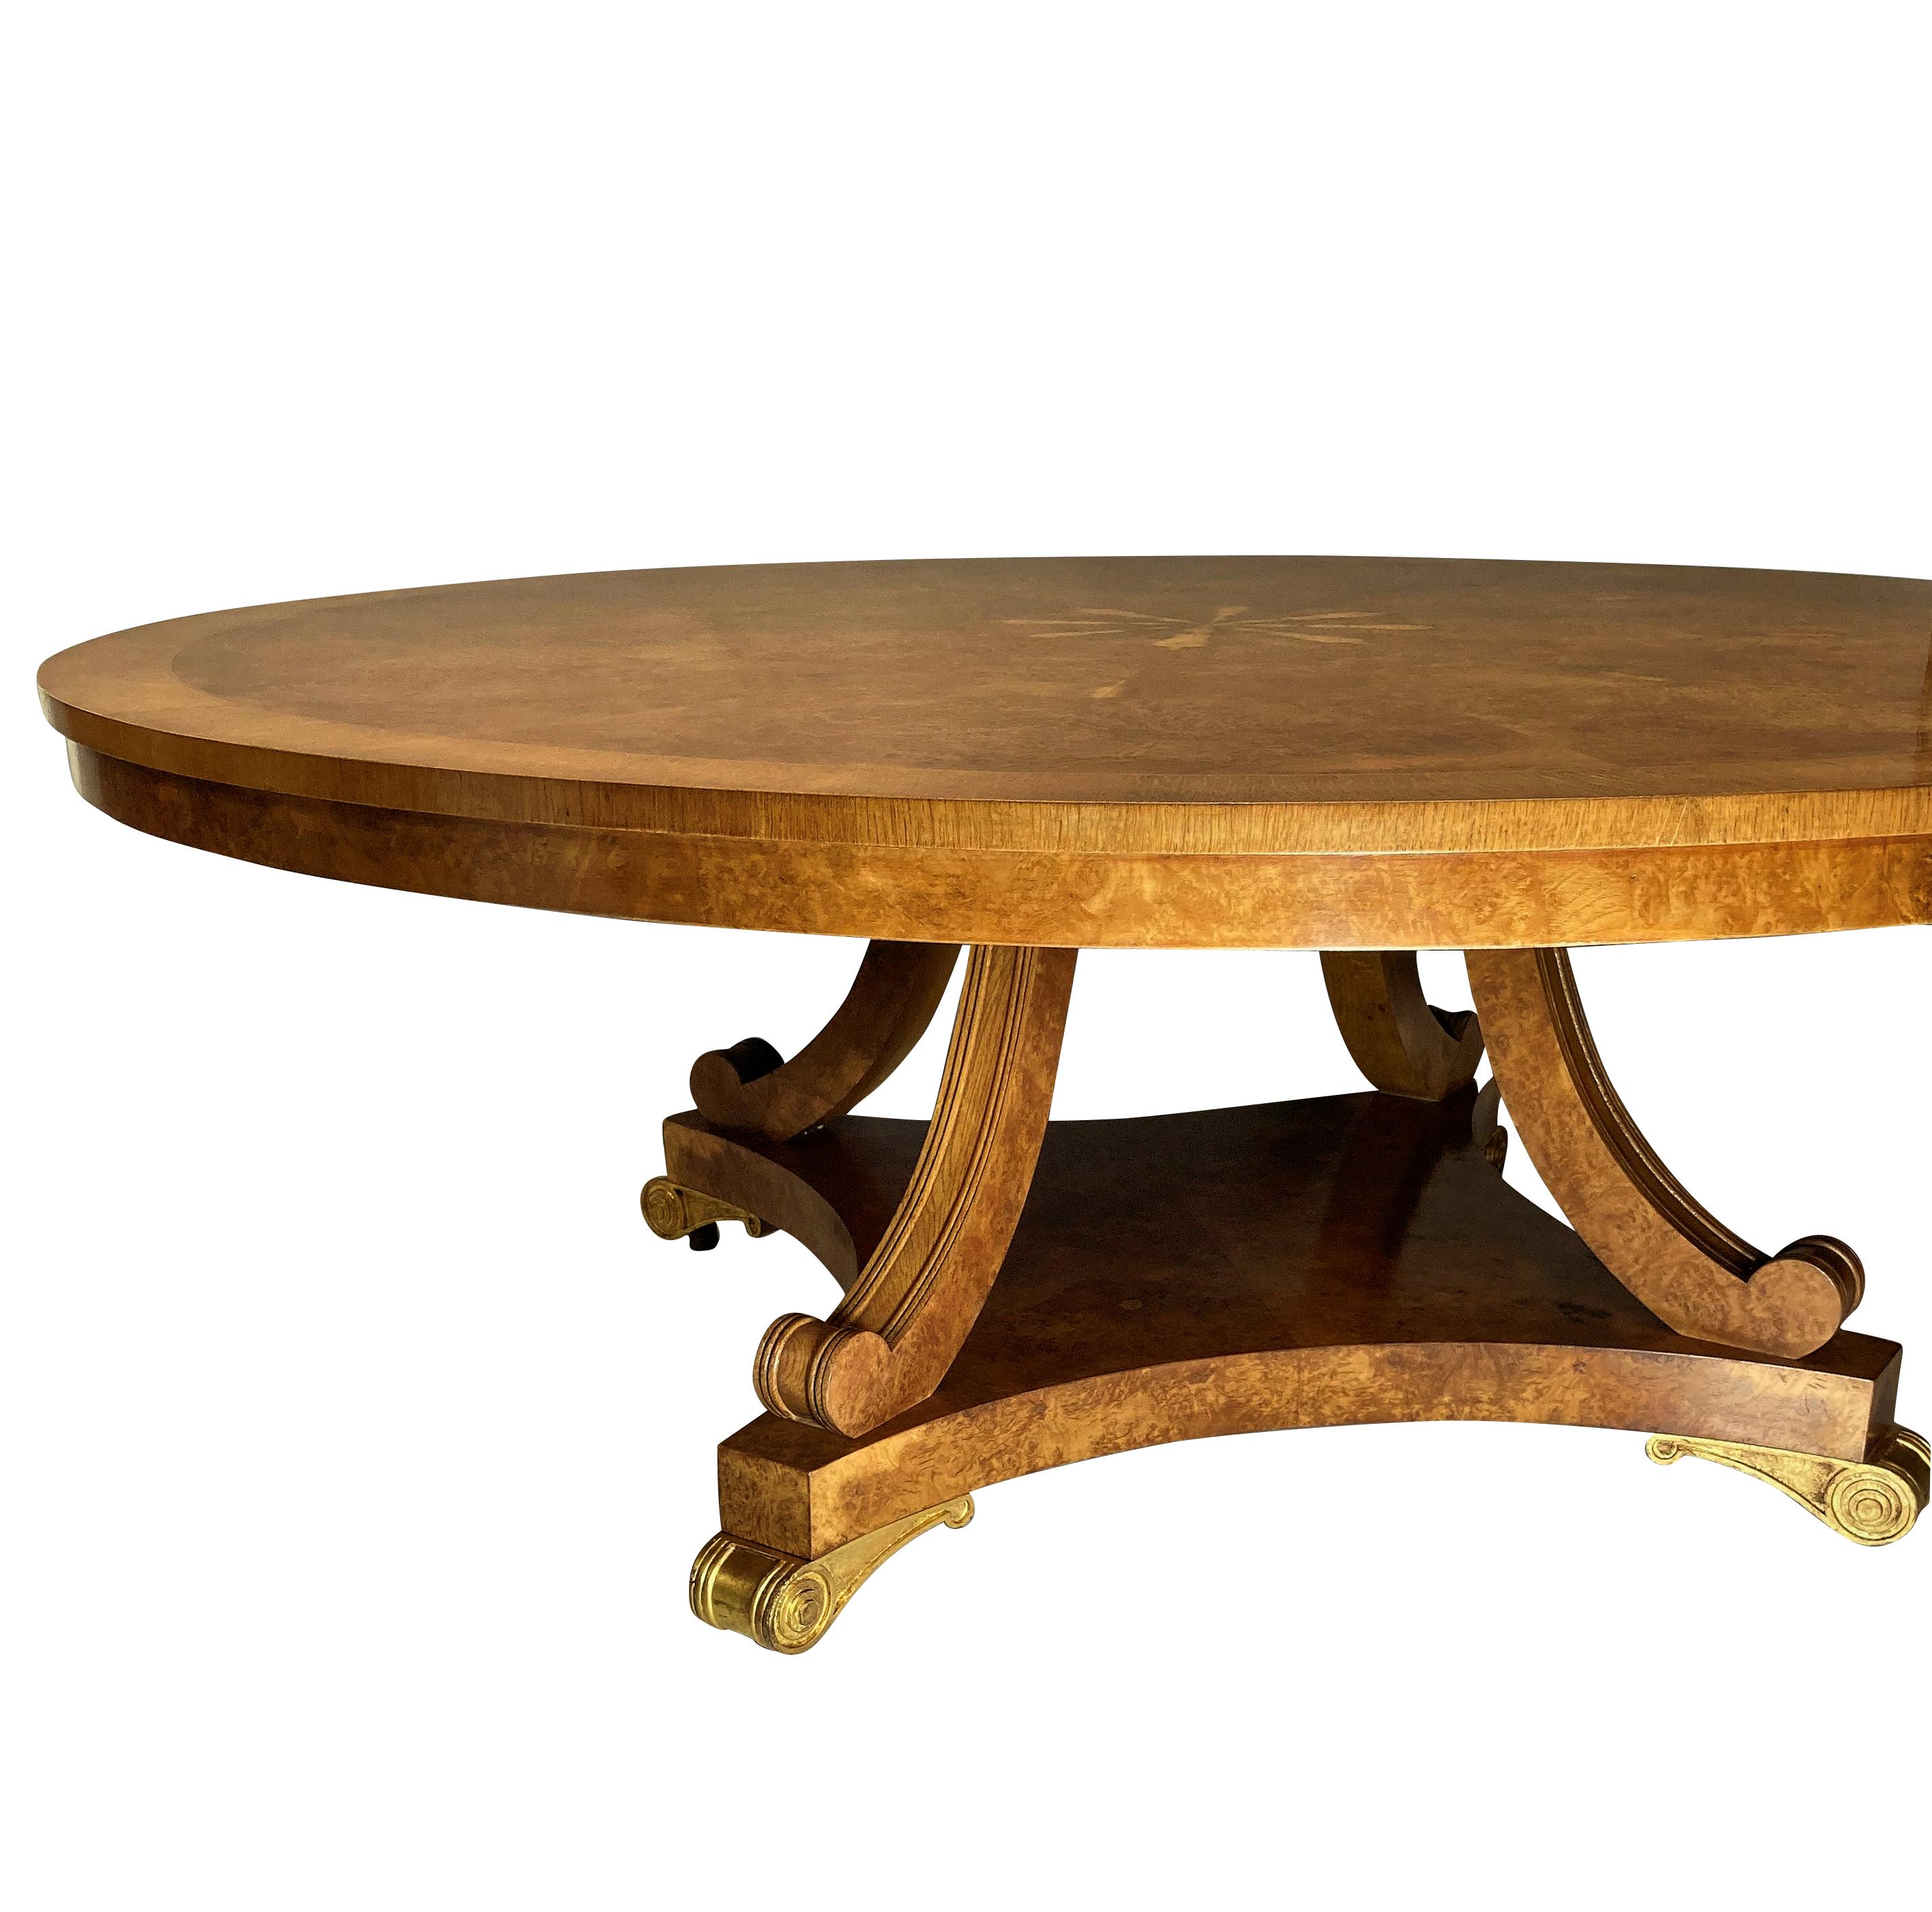 English Large Breakfast Table in the Manner of George Bullock